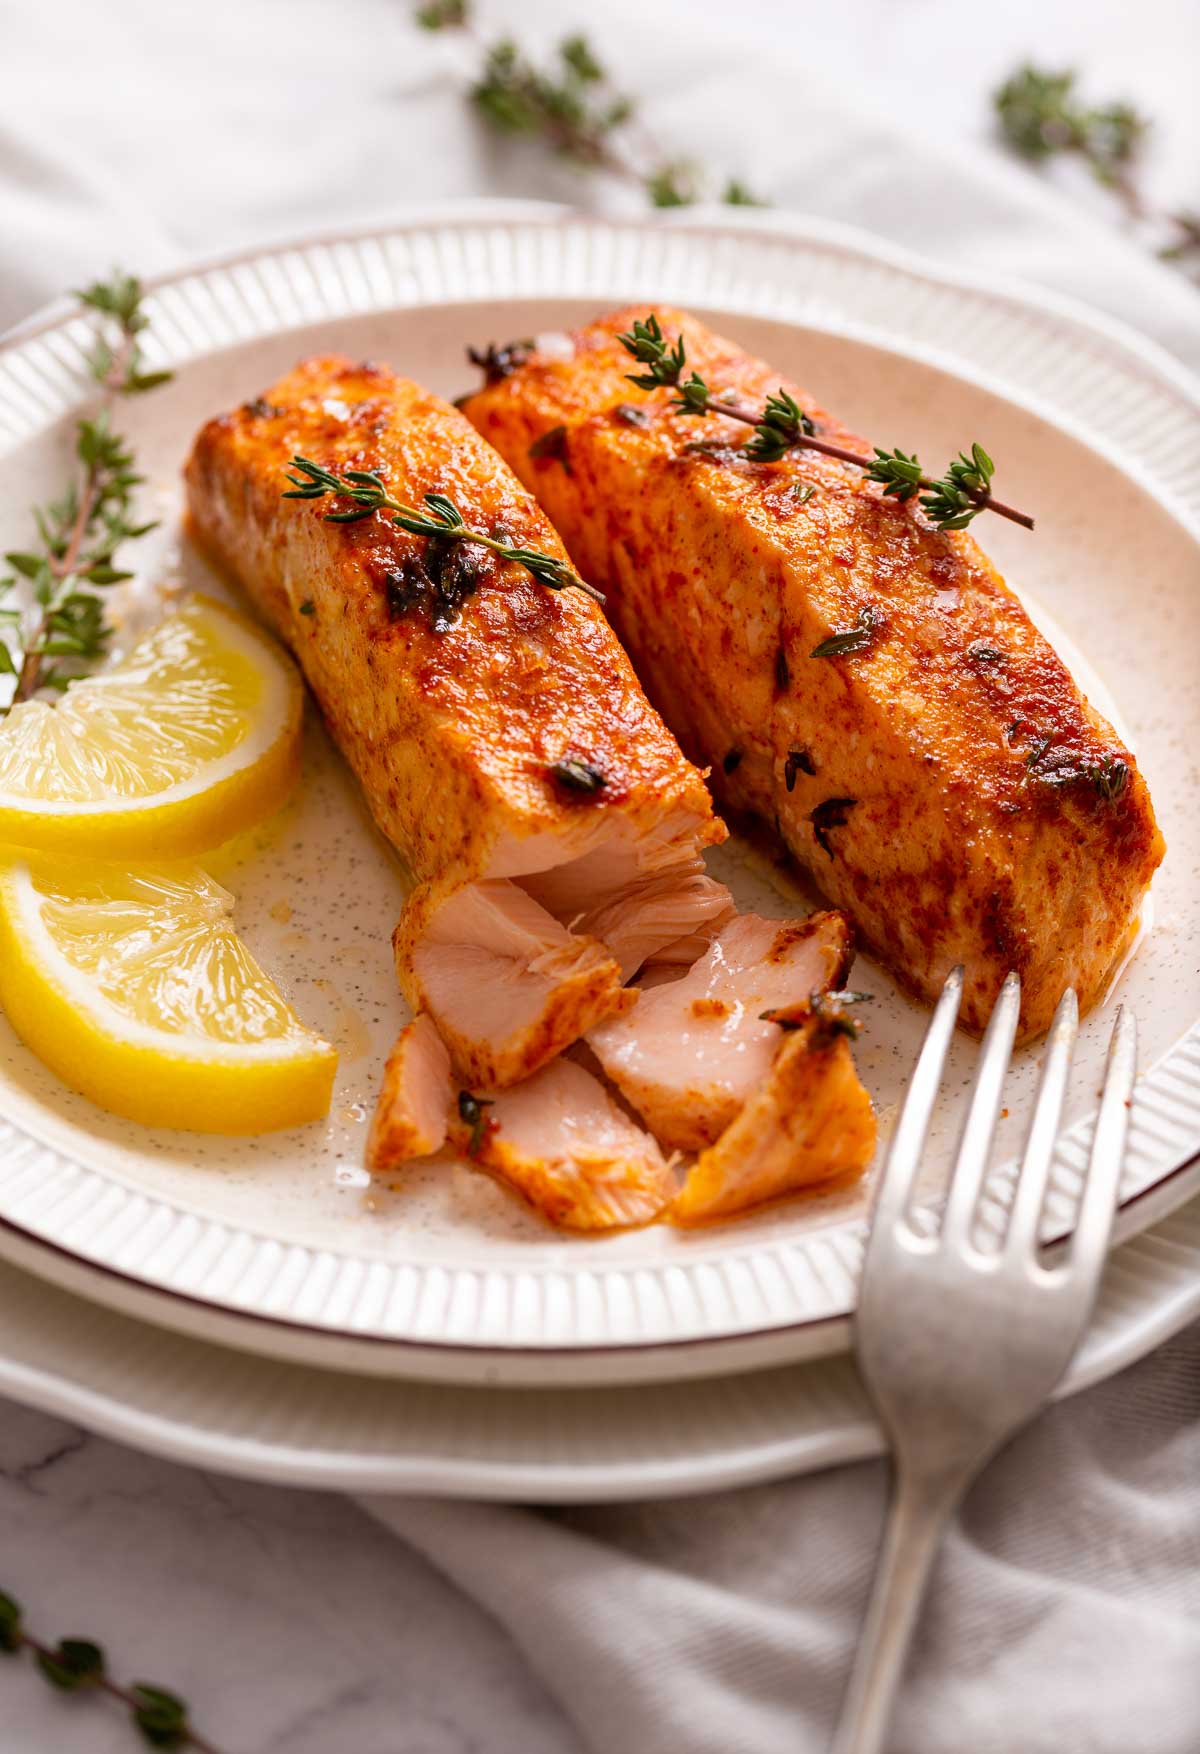 Serving the salmon on a plate with lemon slices.